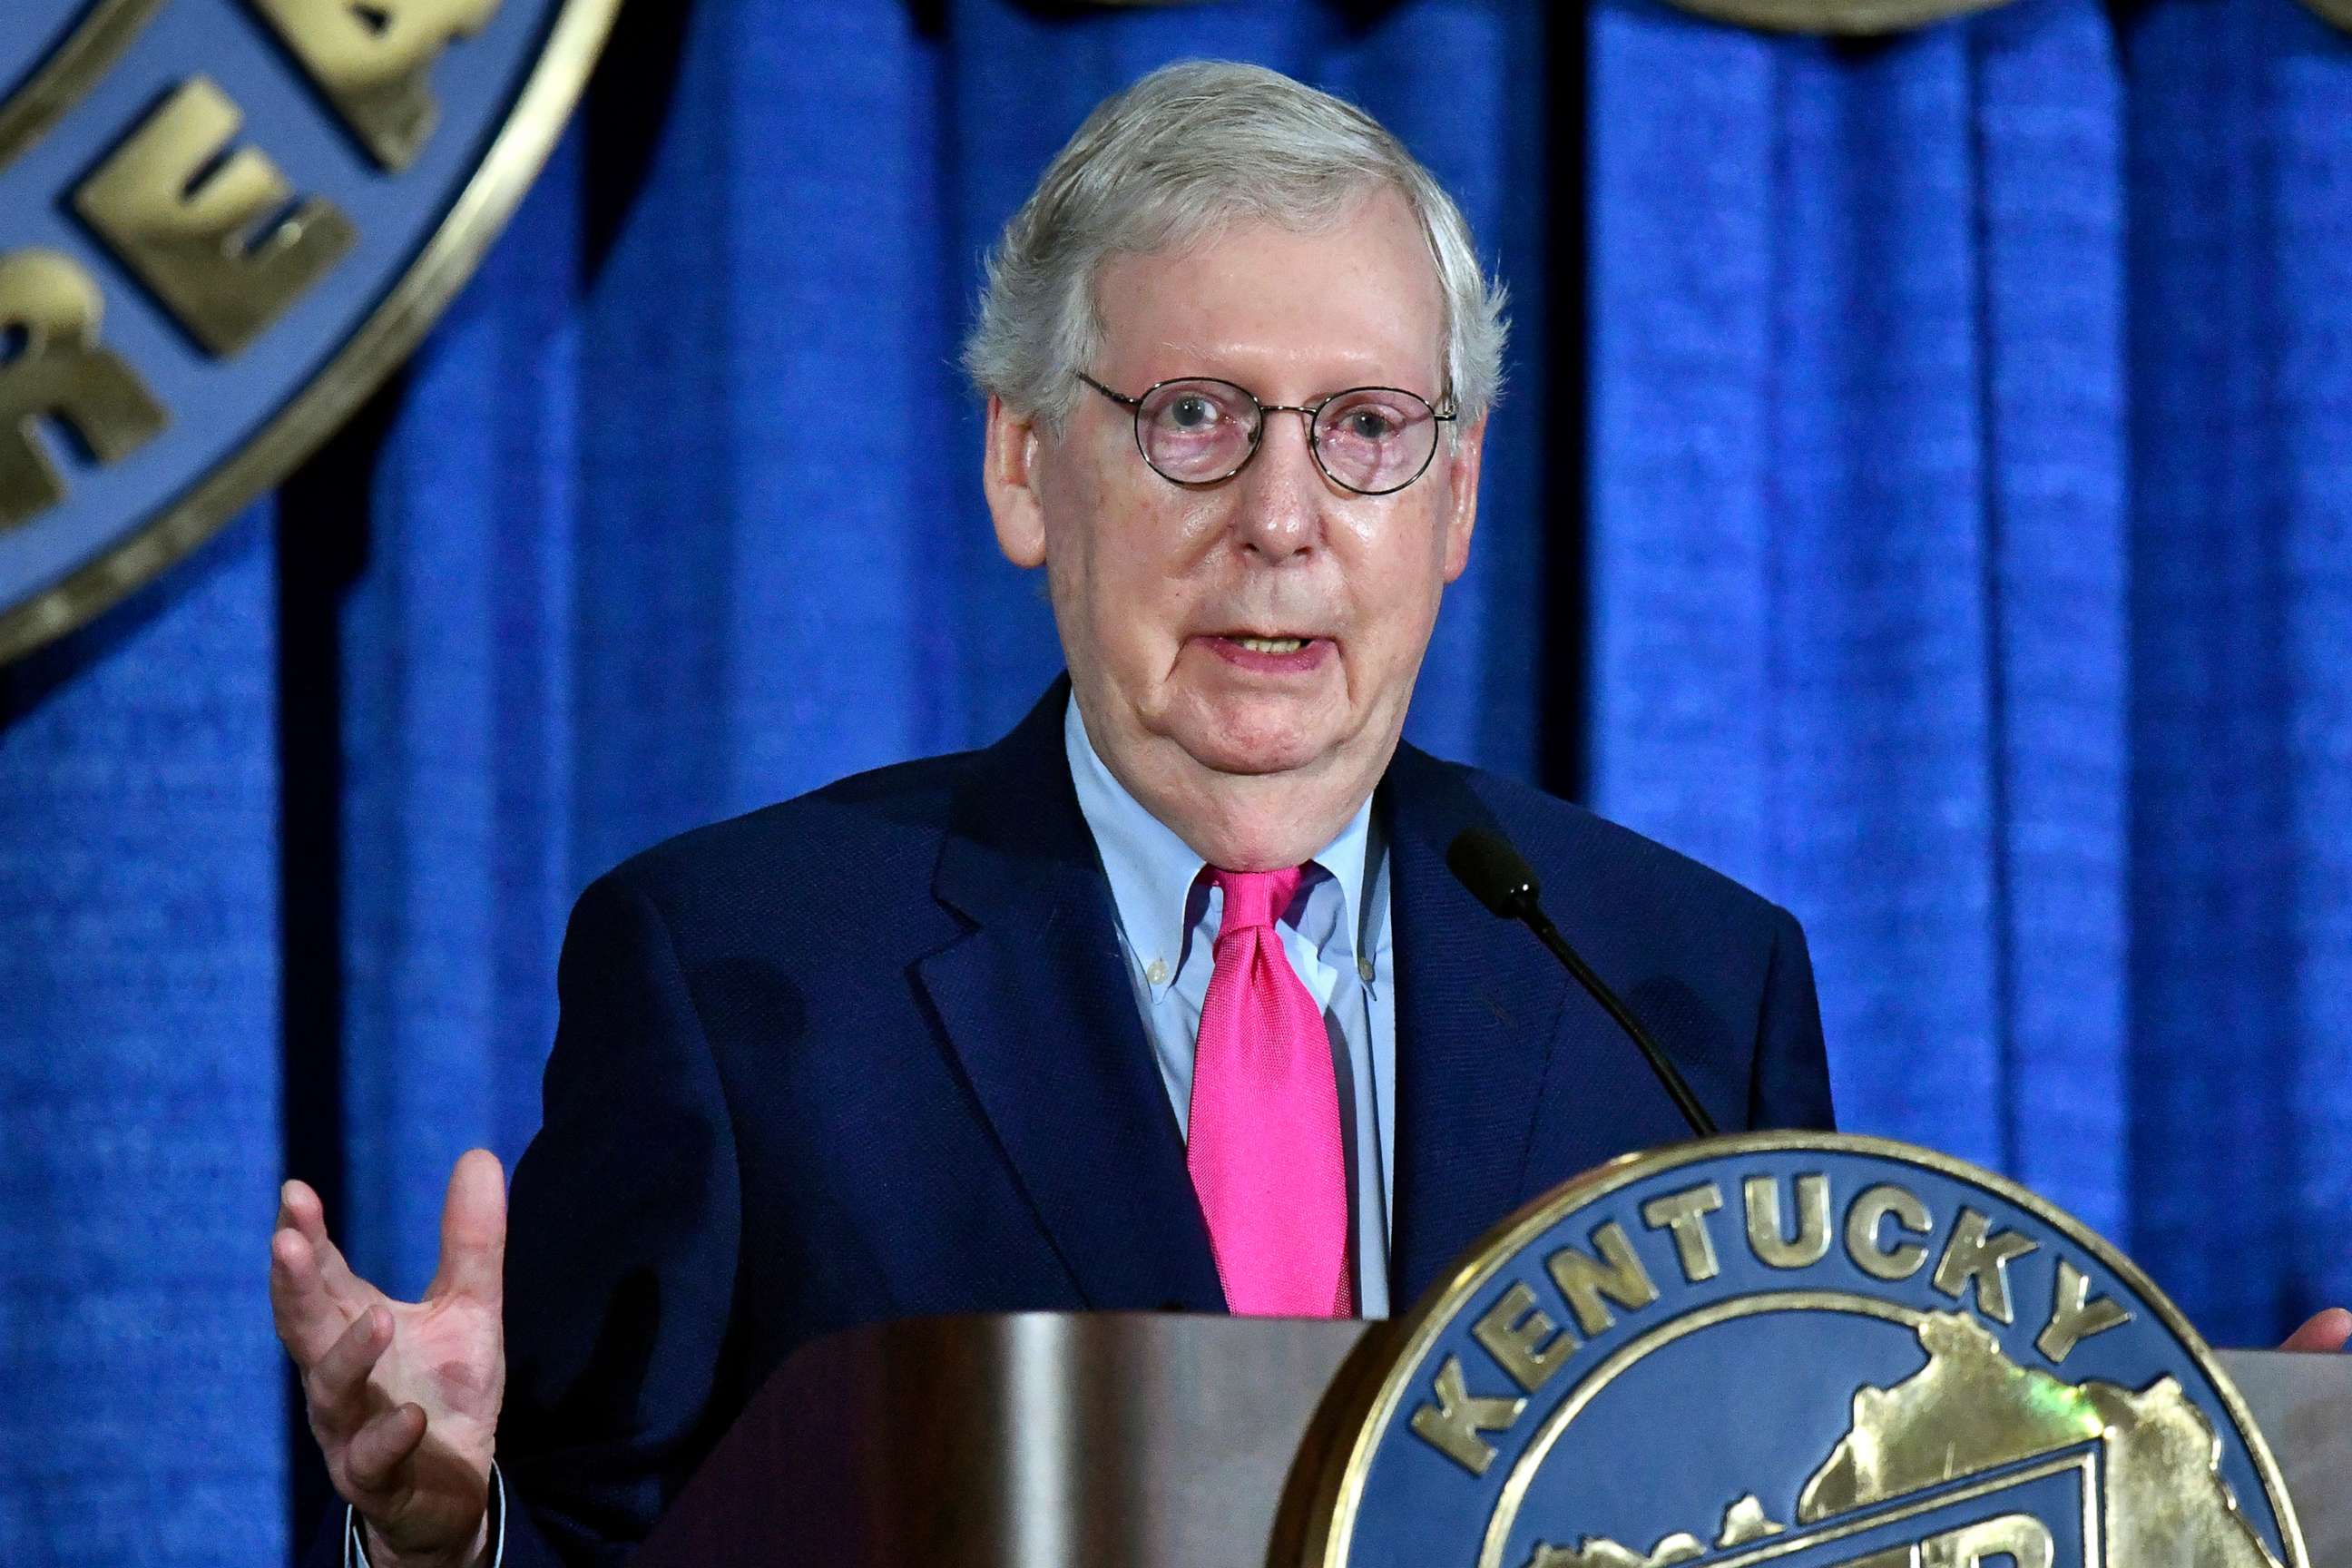 PHOTO: Senate Minority Leader Mitch McConnell addresses the audience at the Kentucky Farm Bureau Ham Breakfast at the Kentucky State Fair in Louisville, Ky., Aug. 25, 2022.